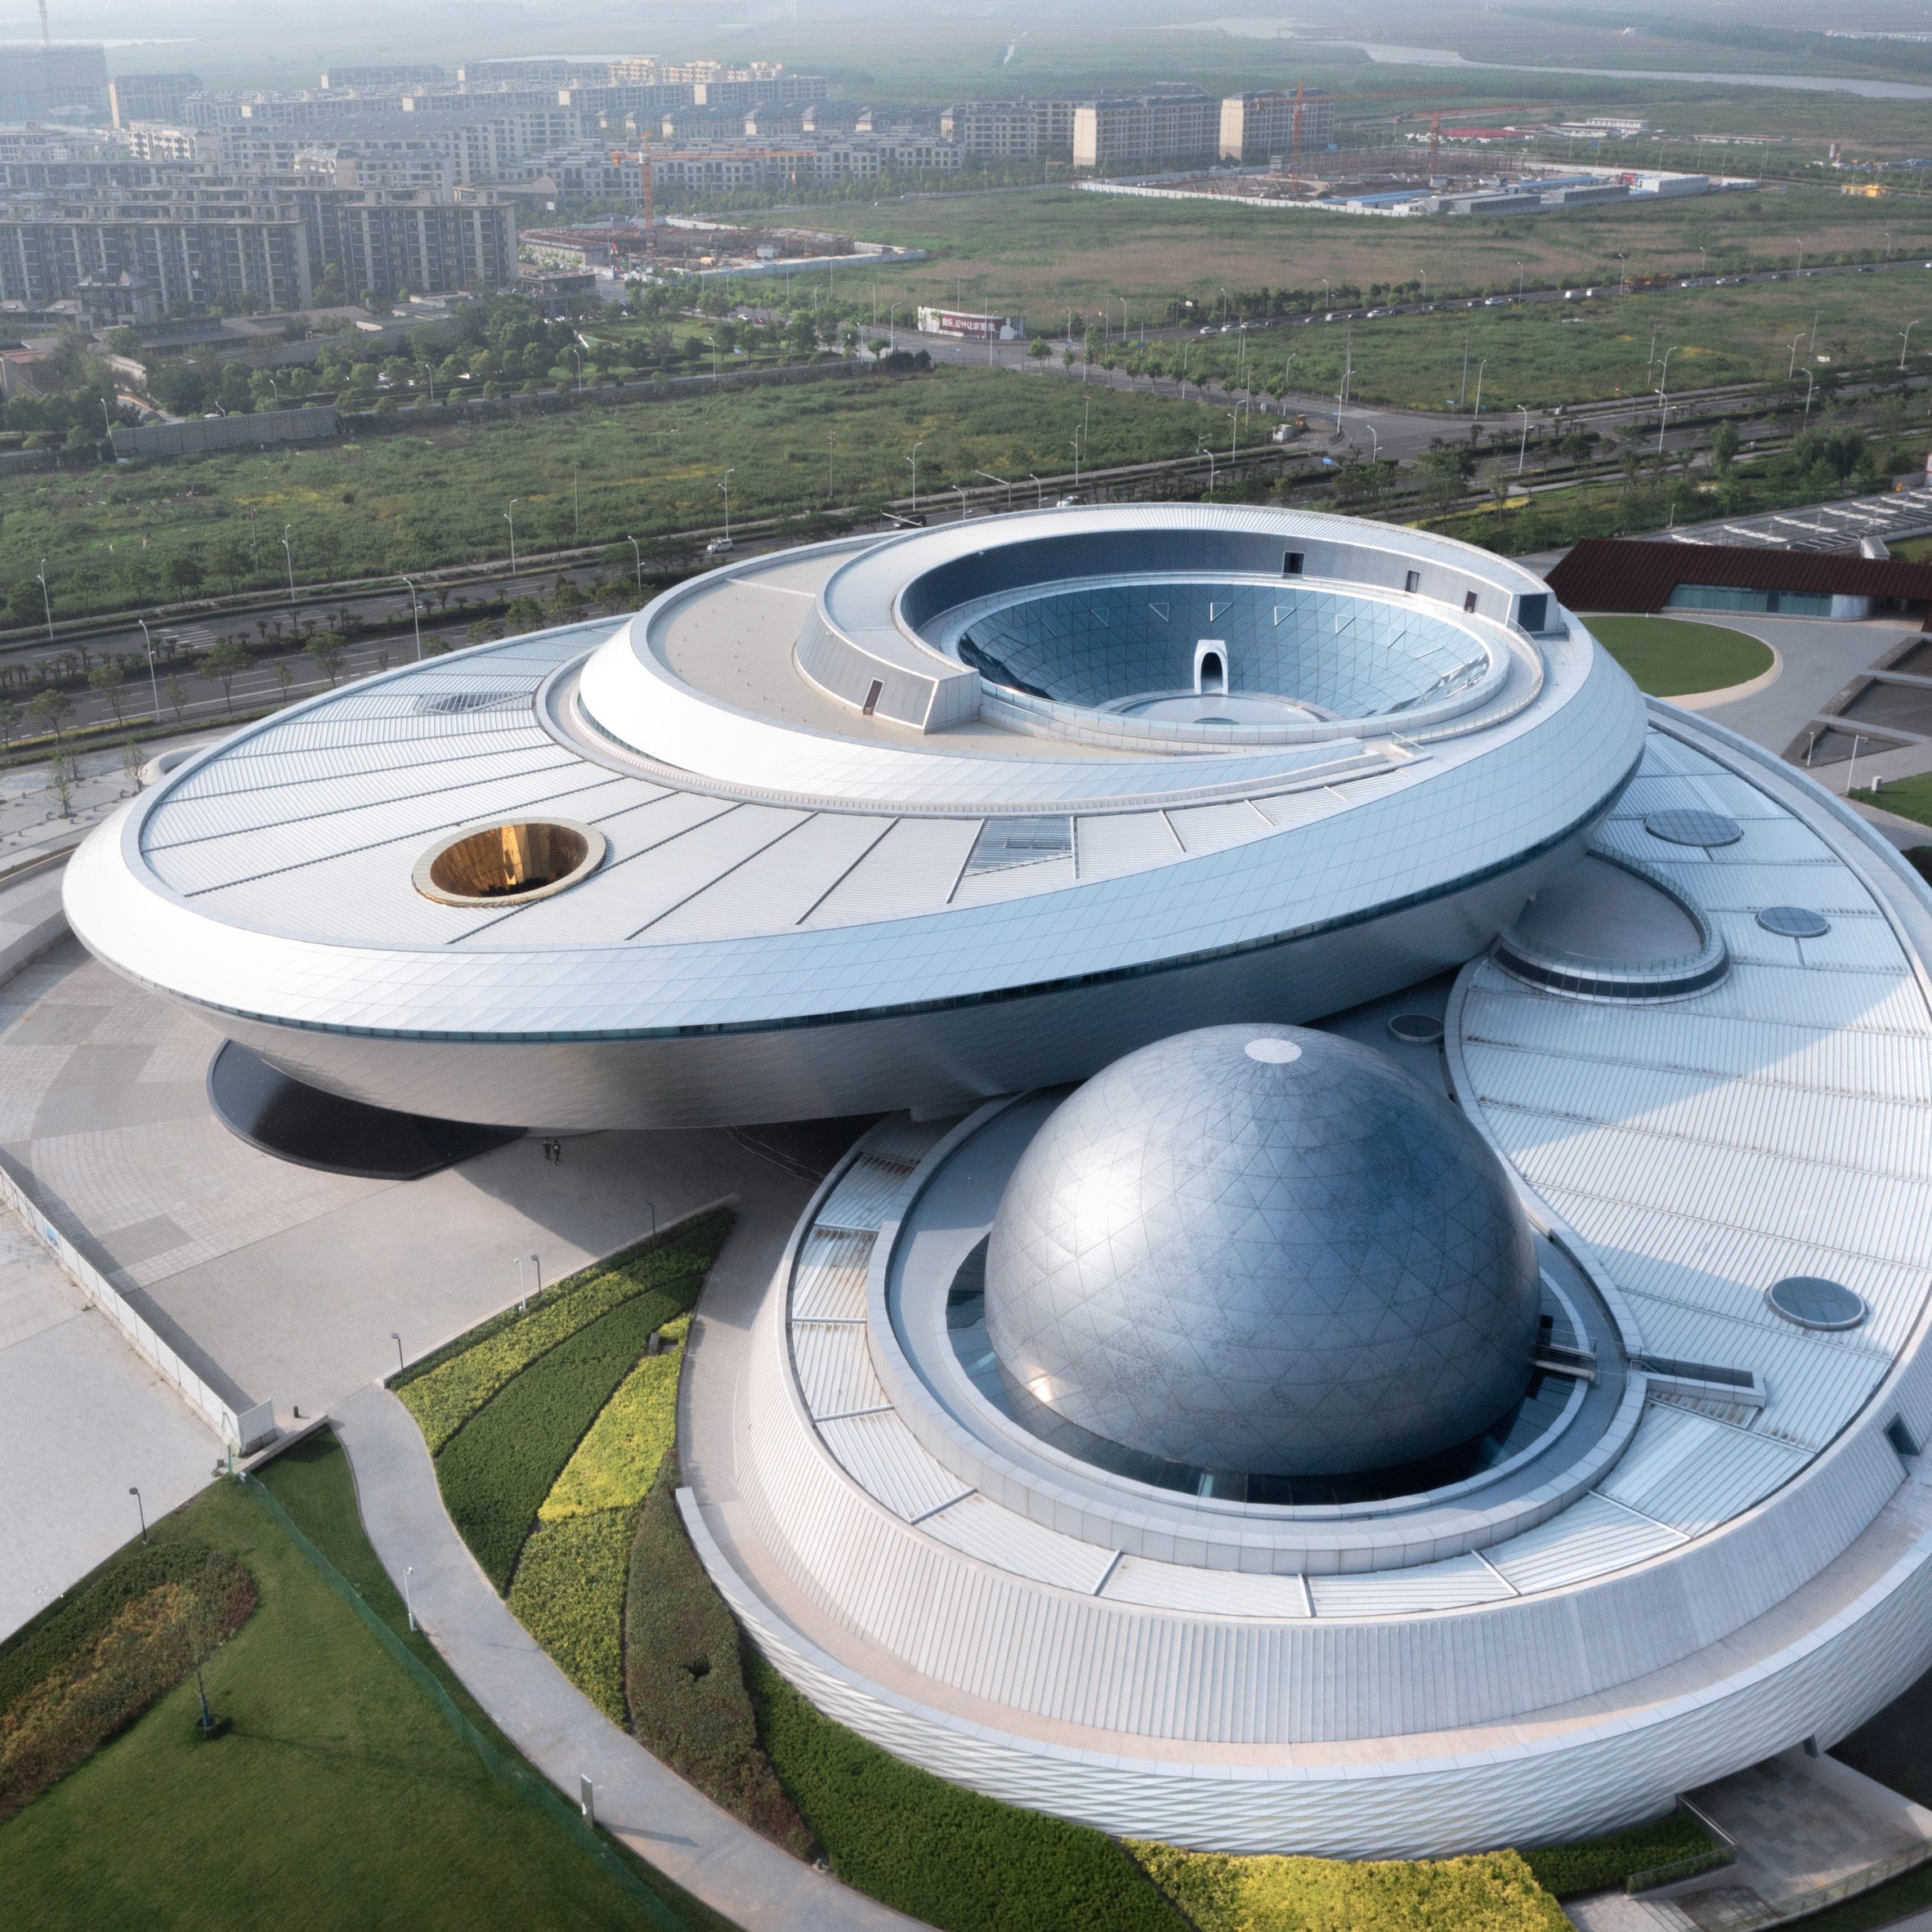 Aerial view of a large circular astronomy museum